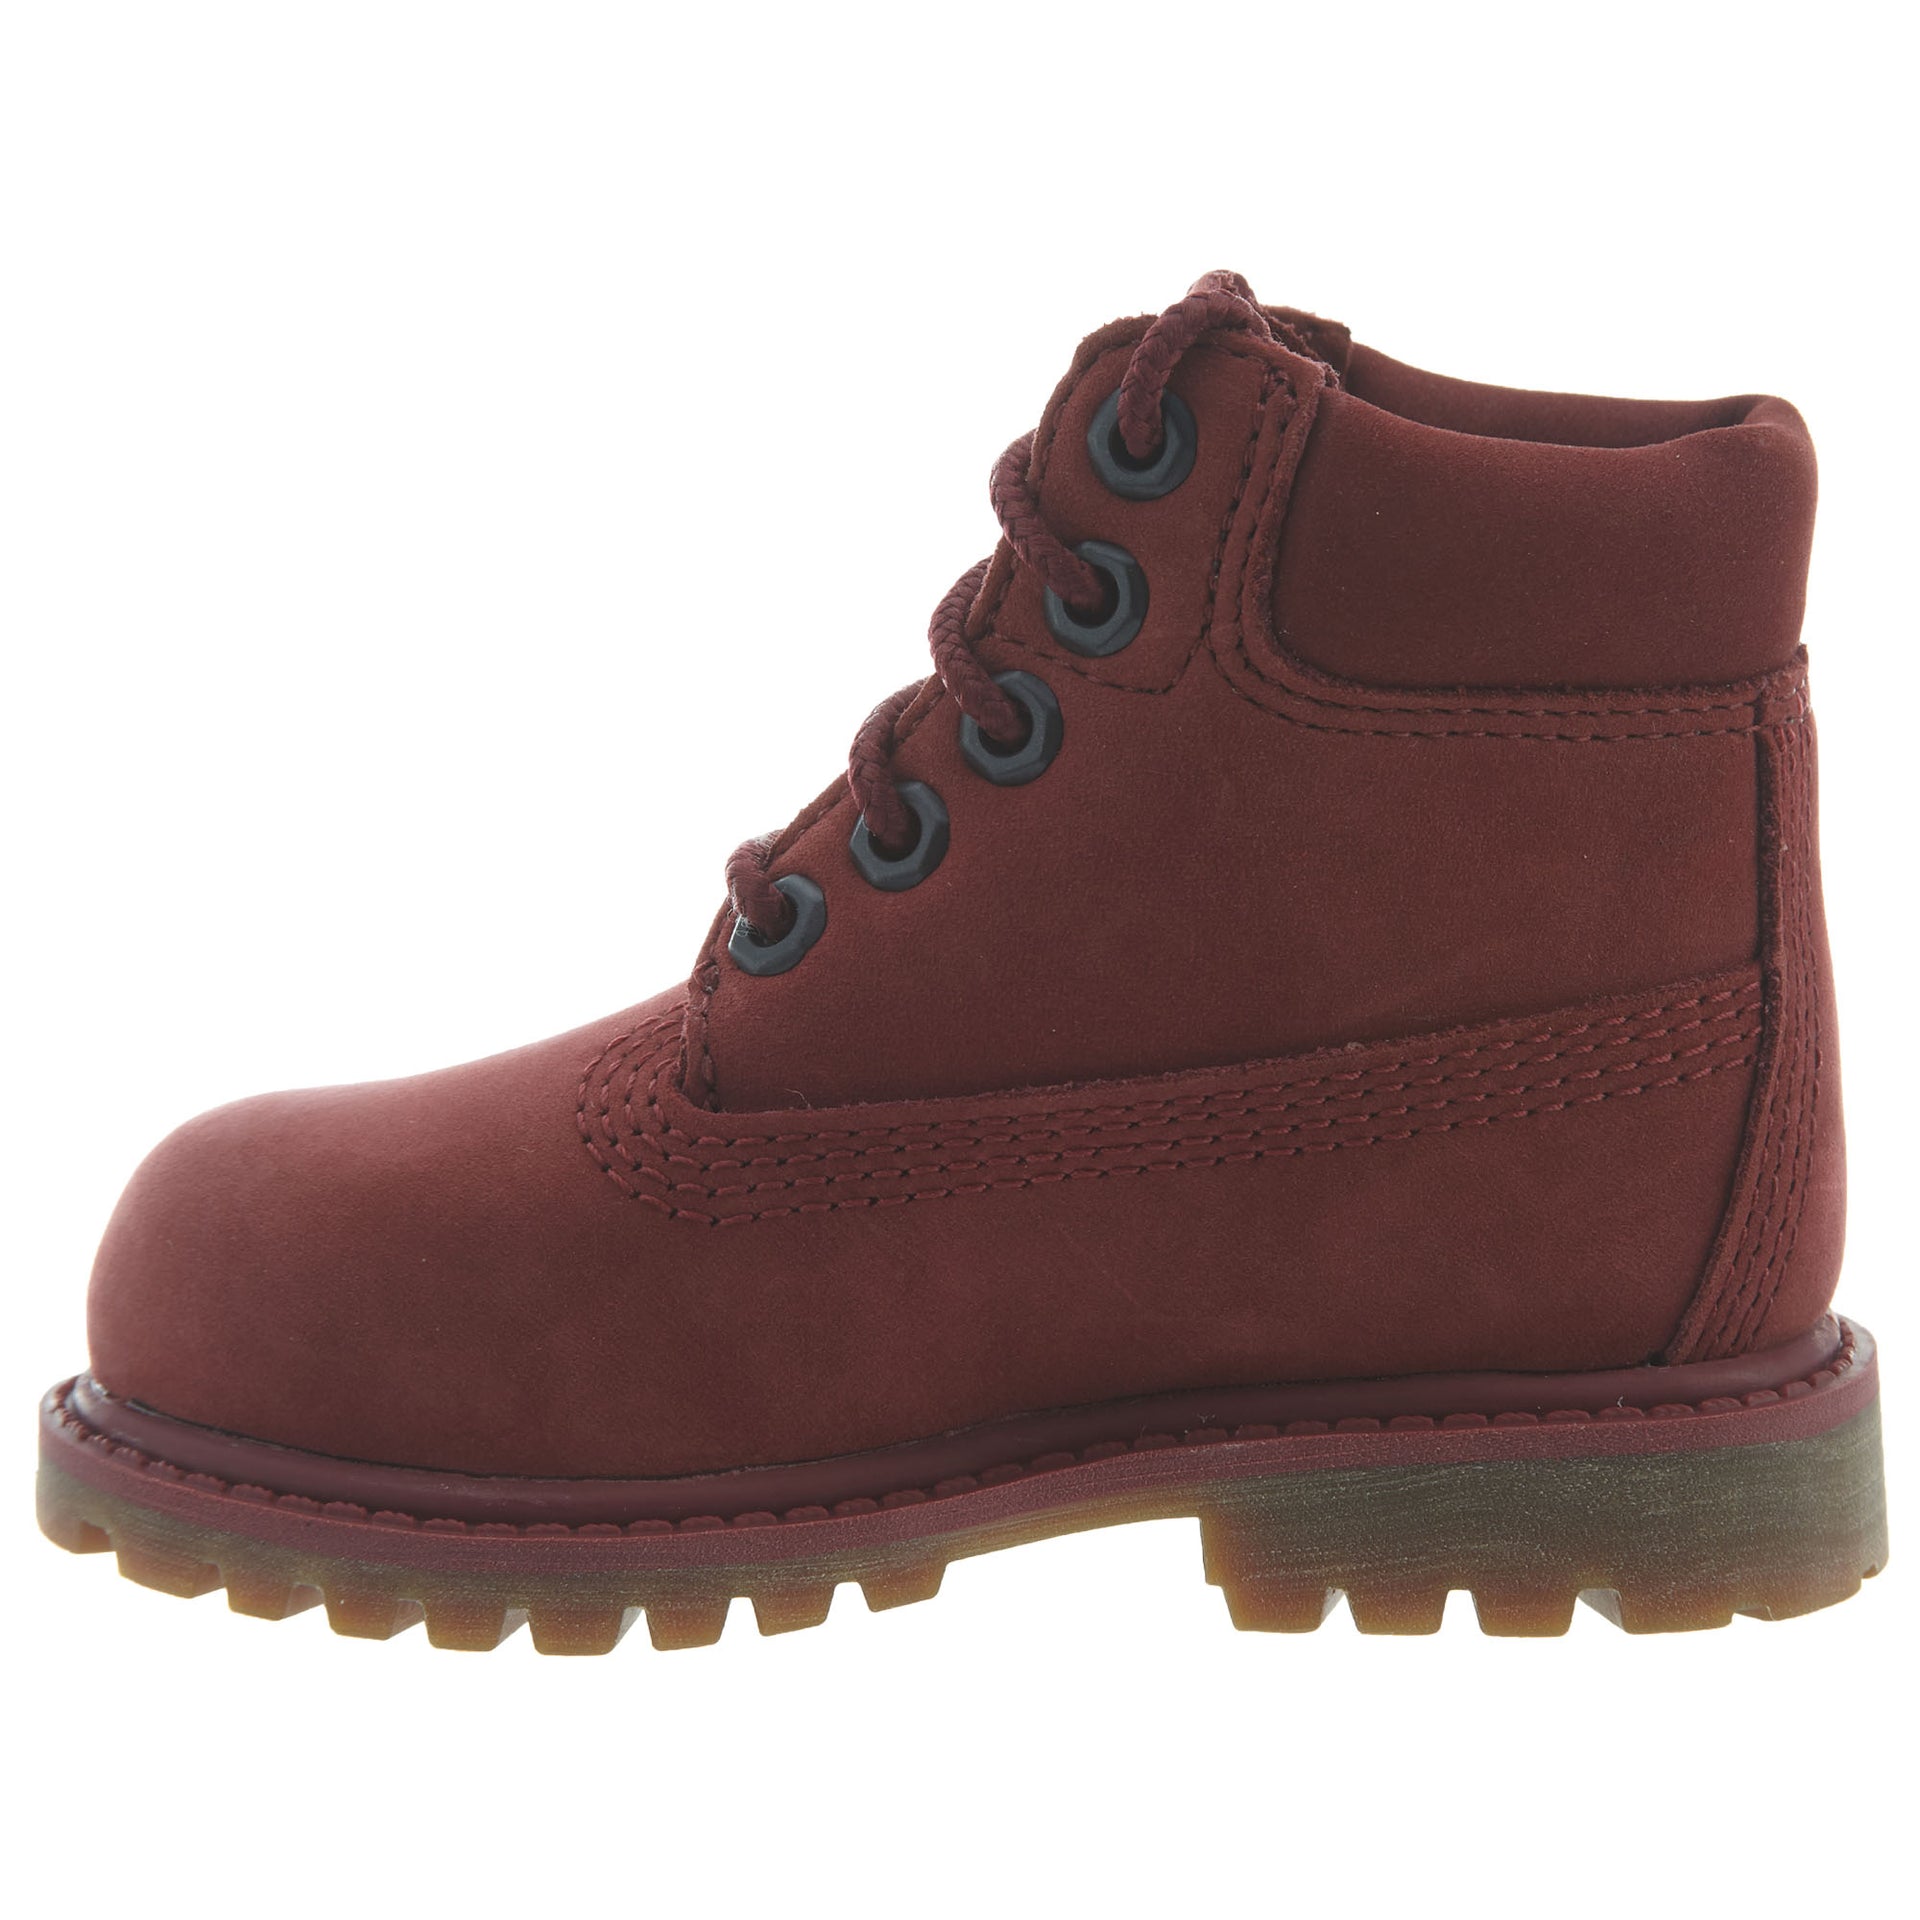 Timberland 6" Premium Boot Toddlers Style : Tb0a1vgc-M49